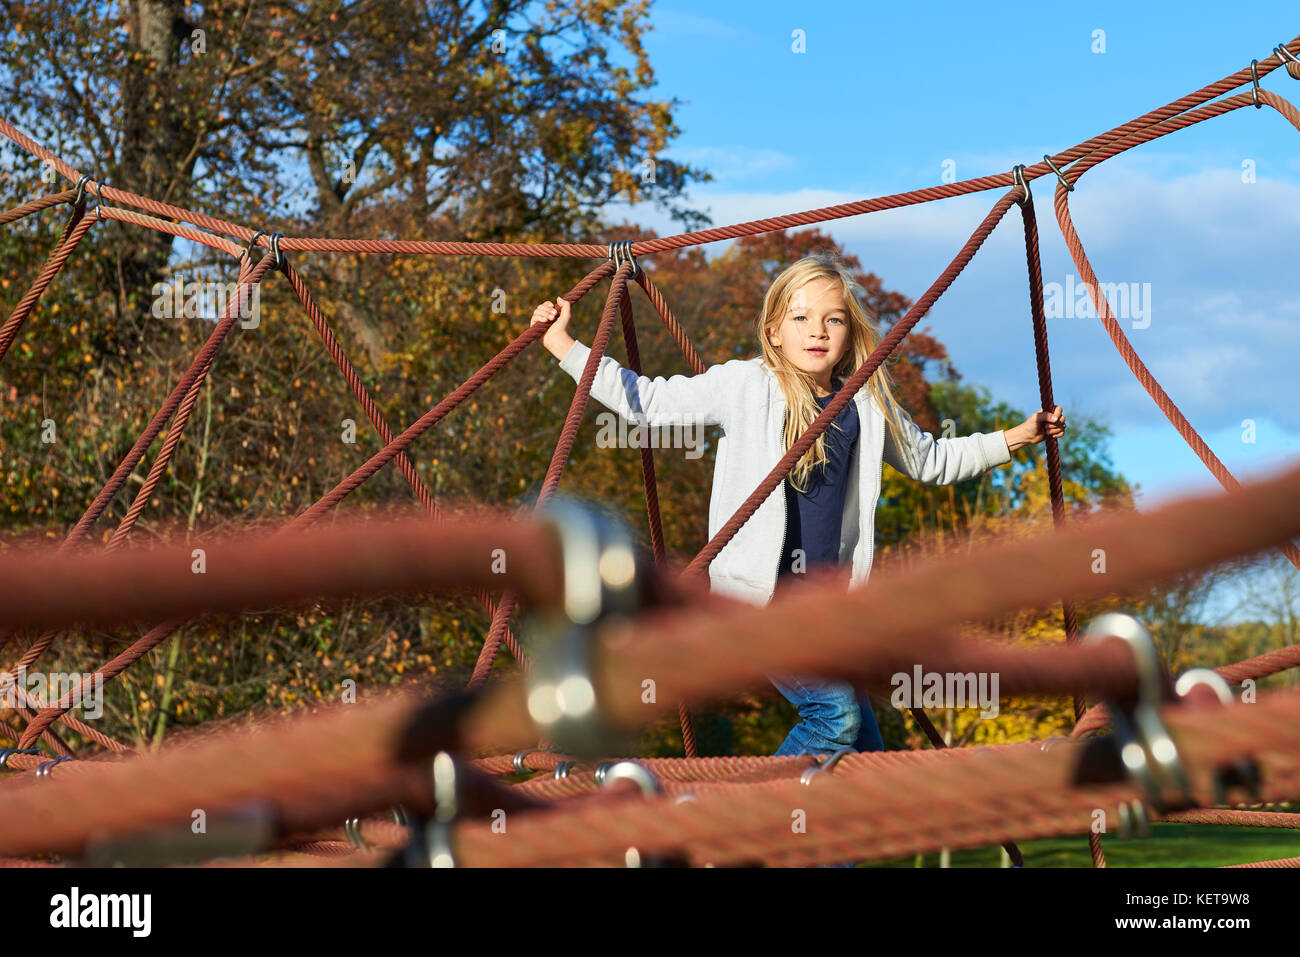 Active young child girl climbing the spider web playground activity. Children outdoor activities. Stock Photo